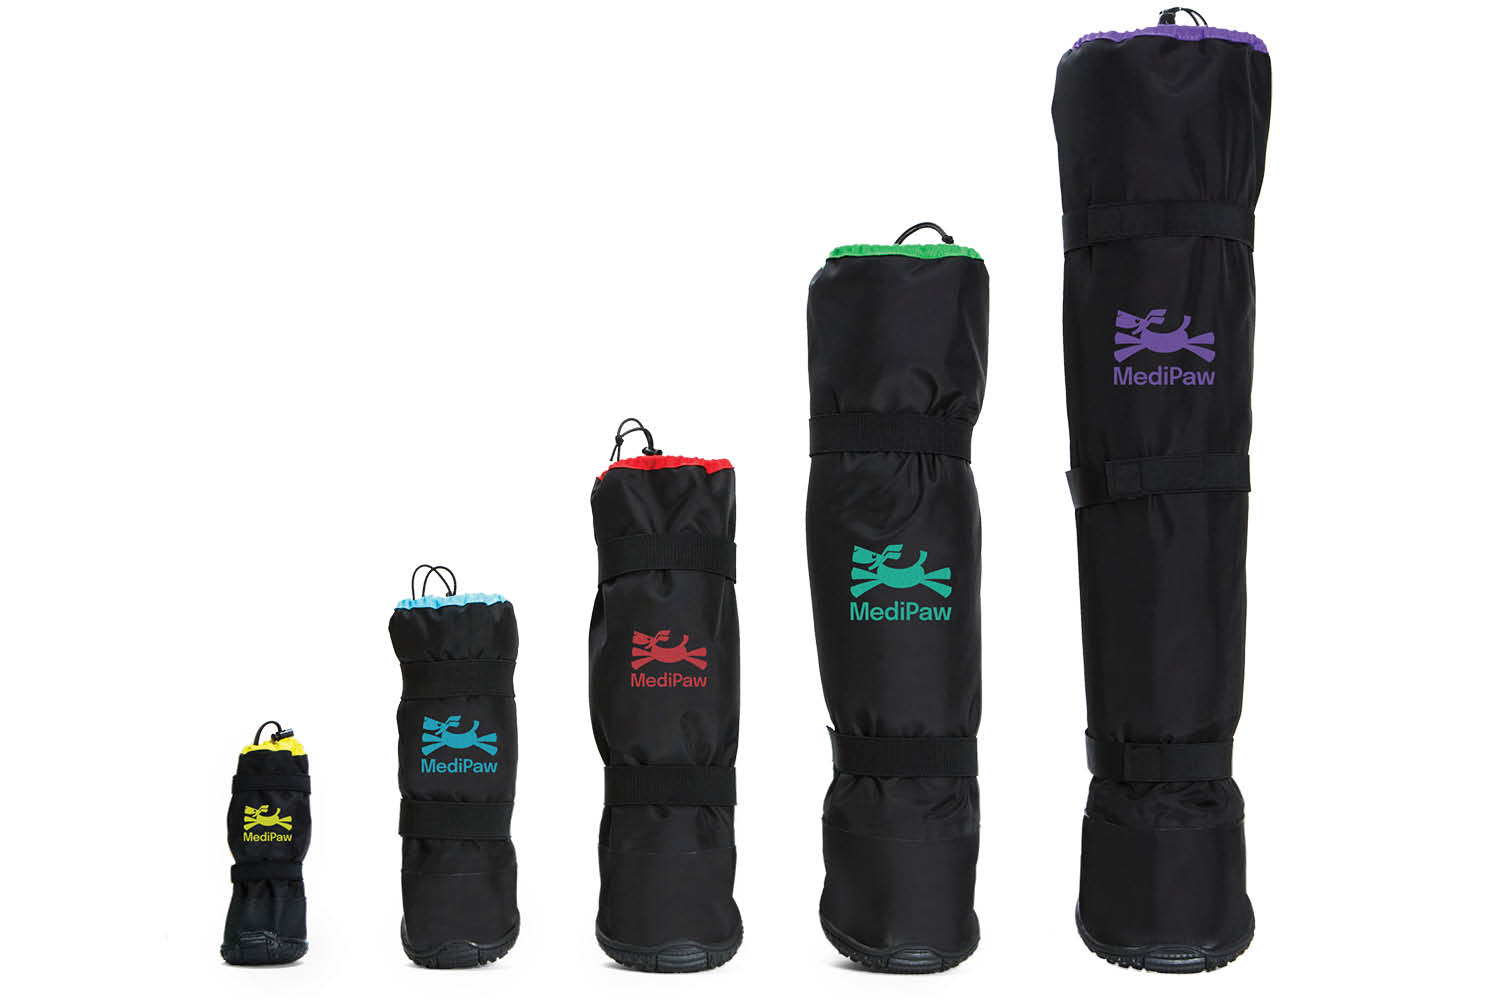 A group of colorful bags with different designs, including Your Whole Dog's MediPaw: Rugged X-Boot items and boots.